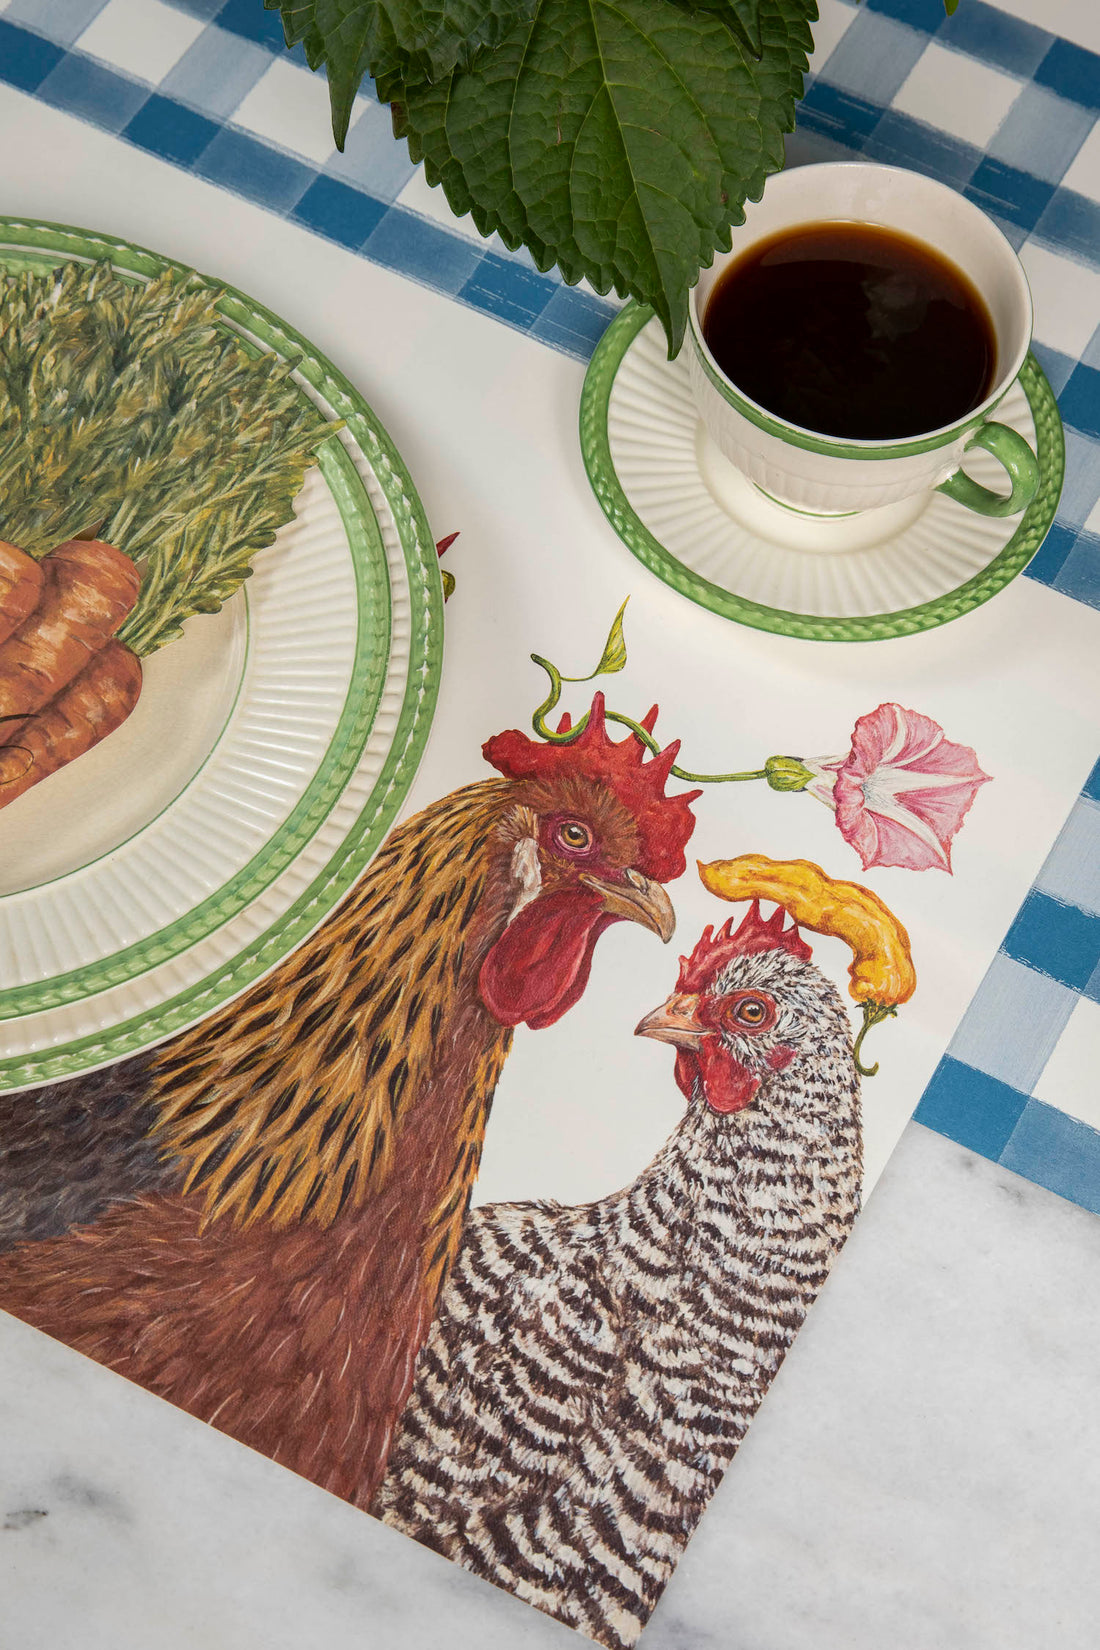 The Chicken Social Placemat under a charming place setting.